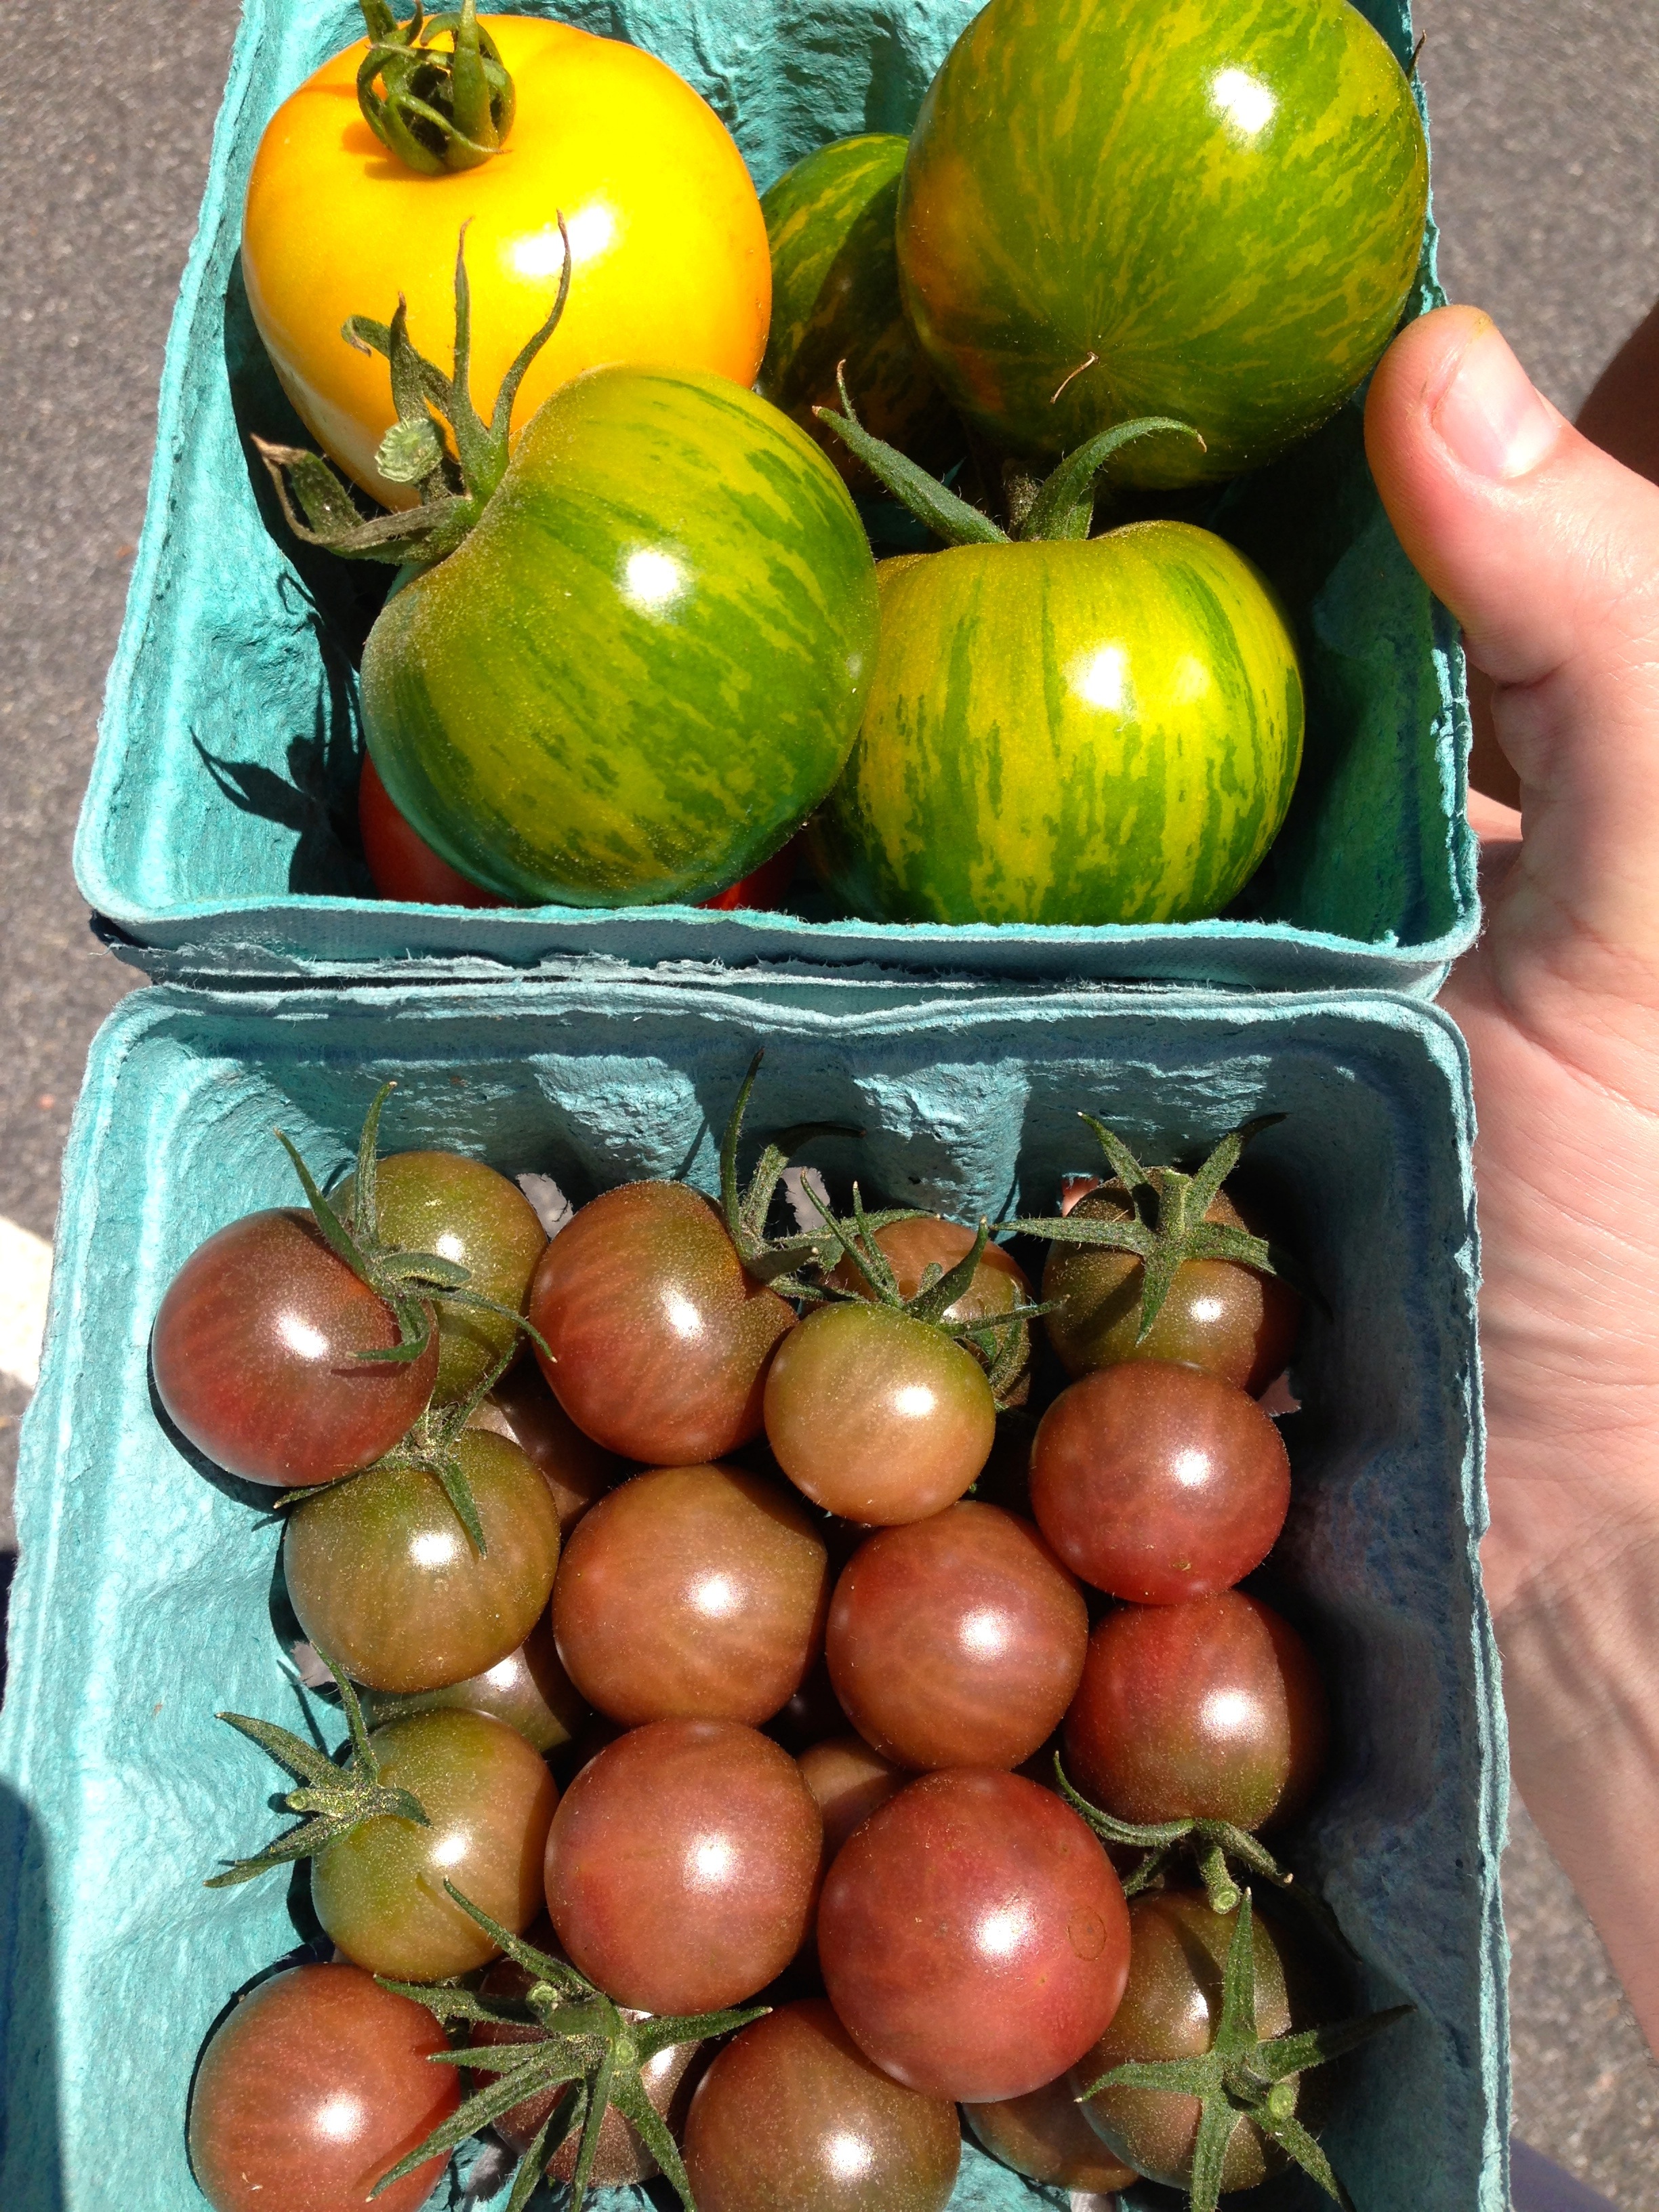 Stunningly good tomatoes from my friend's farm on Cape Cod